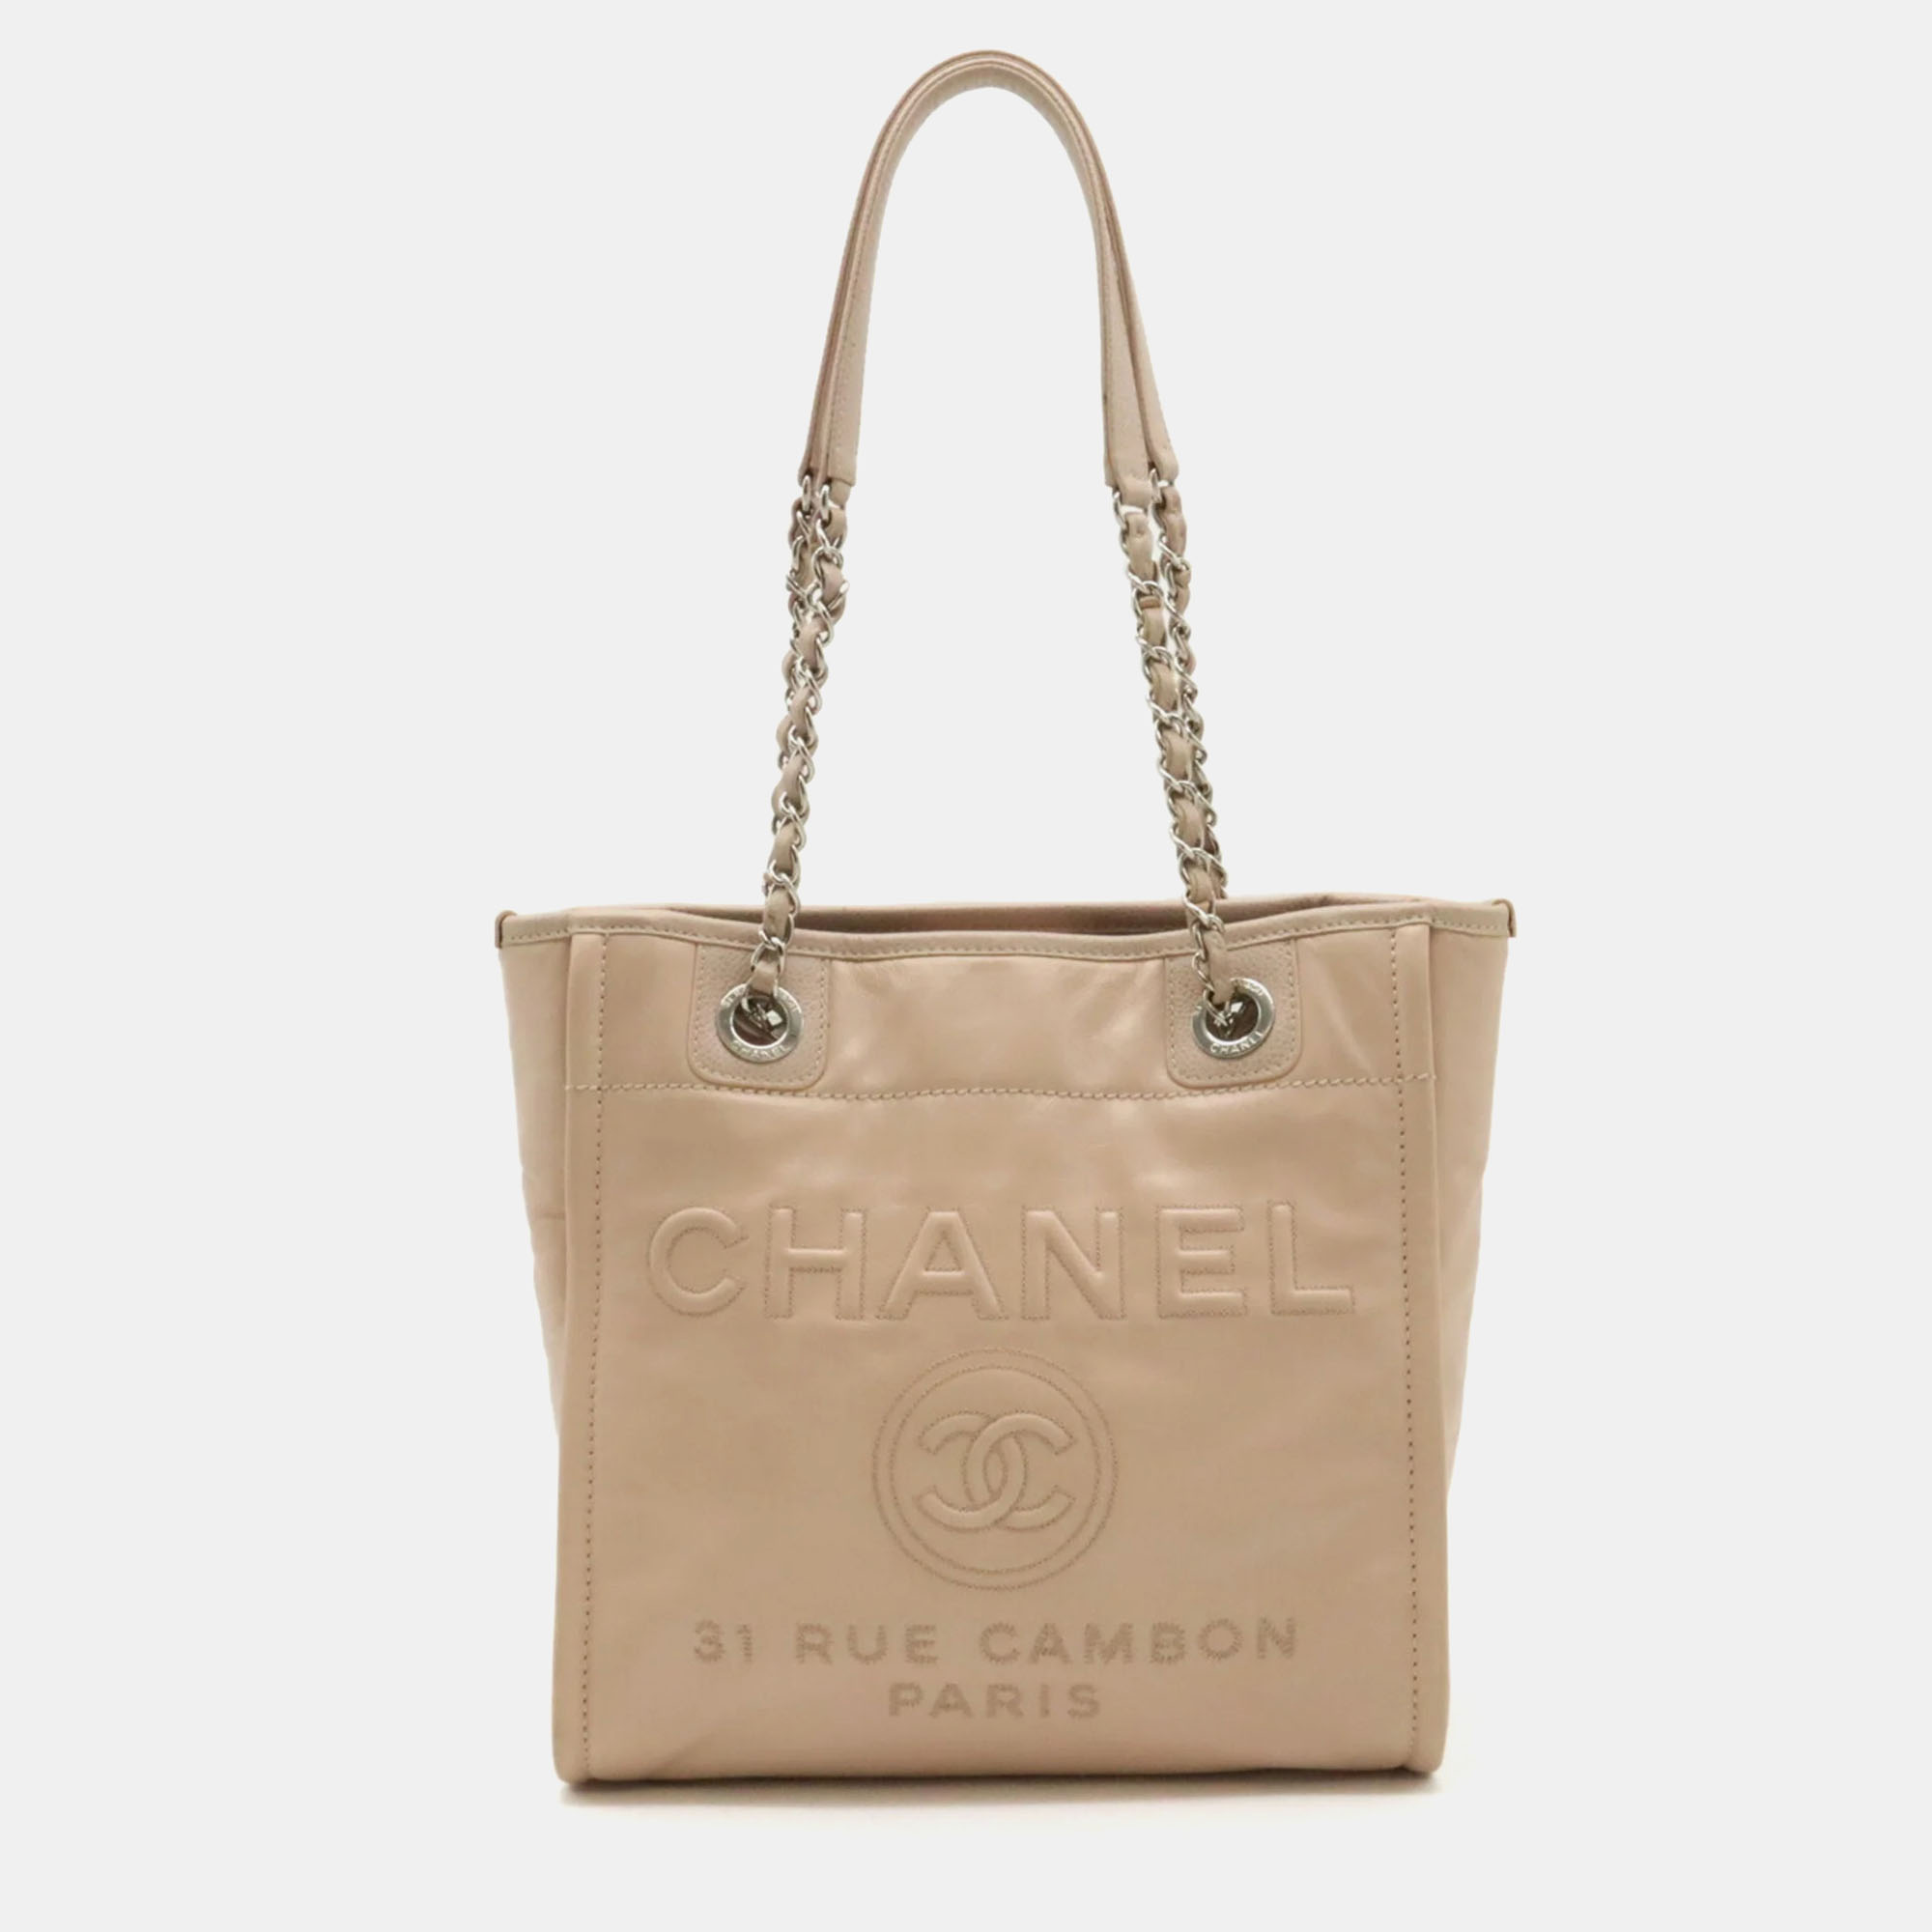 

Chanel Beige Leather Small Deauville Tote Bag